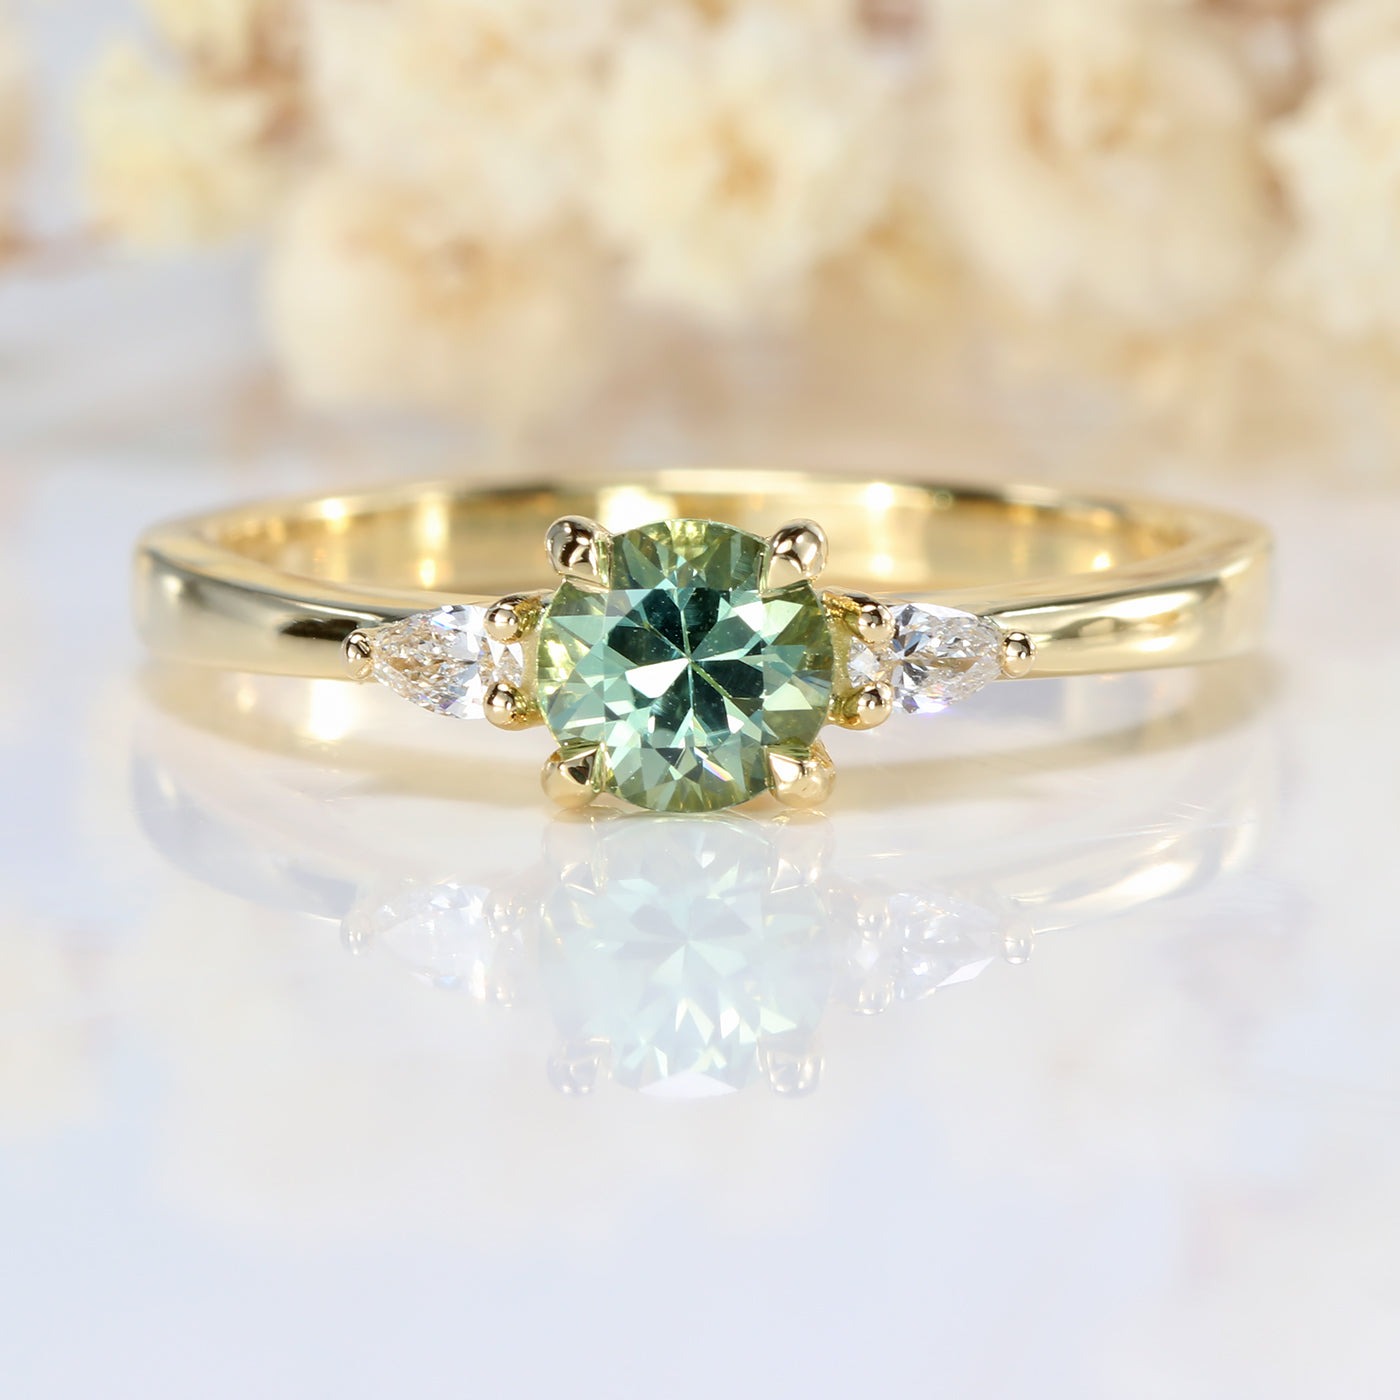 Mint Green Sapphire & Diamond Trilogy Engagement Ring (Size M 1/2, Resized K 1/2 to O 1/2)